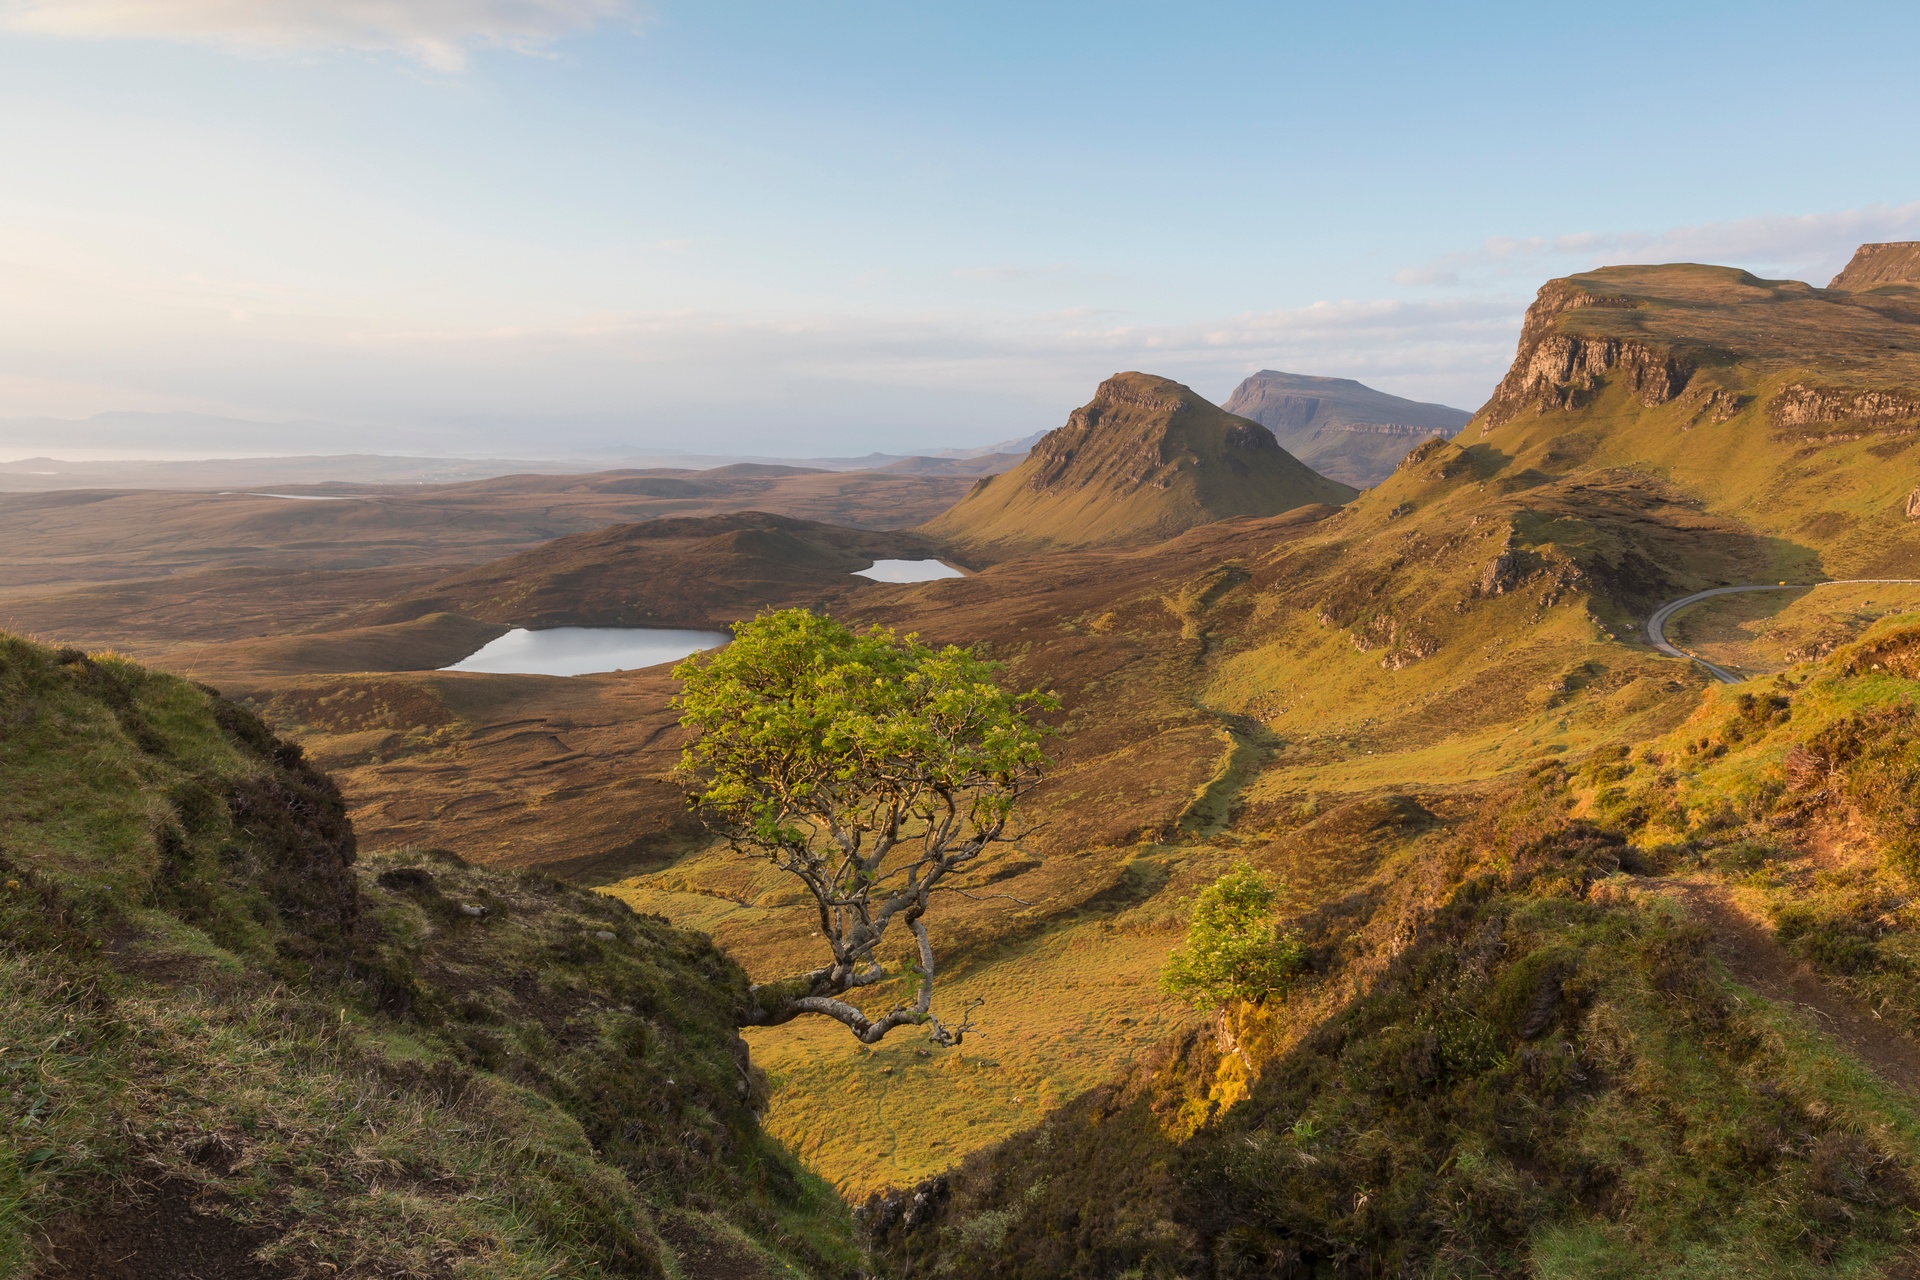 A view of the Quiraing on the Isle of Skye, at sunrise